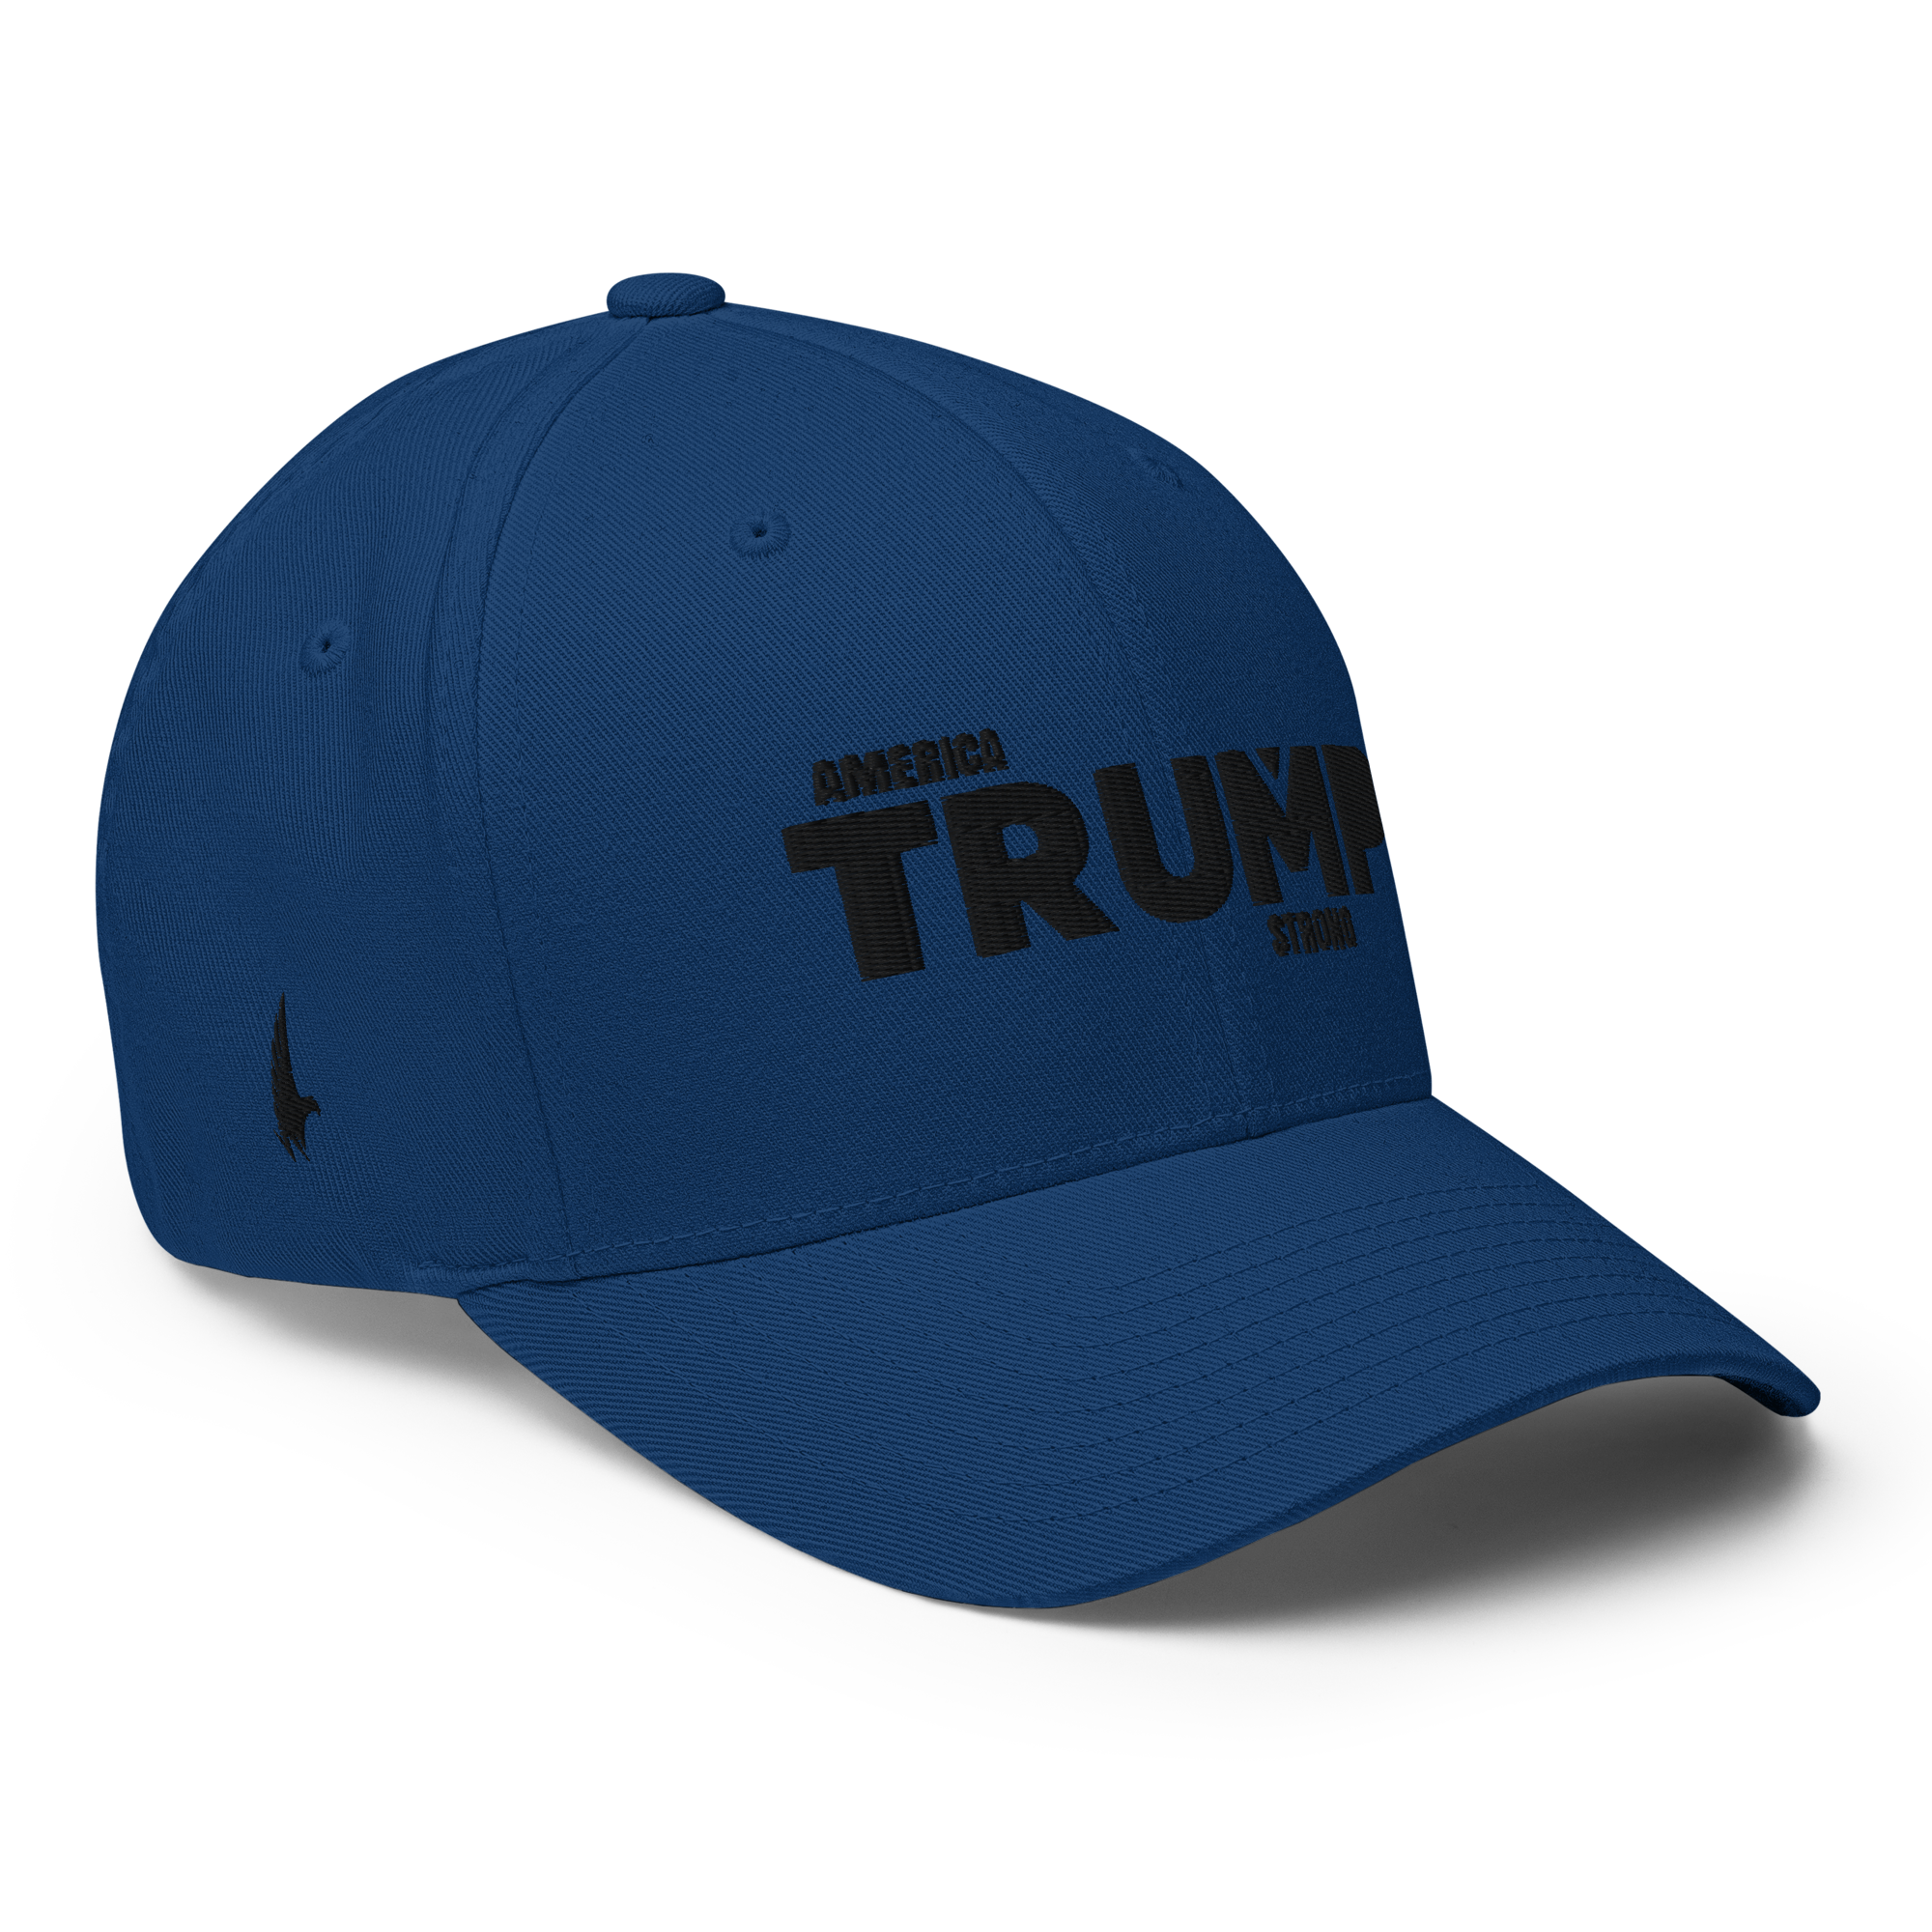 America Strong Trump Flexfit Hat Blue / Black Fitted - Loyalty Vibes